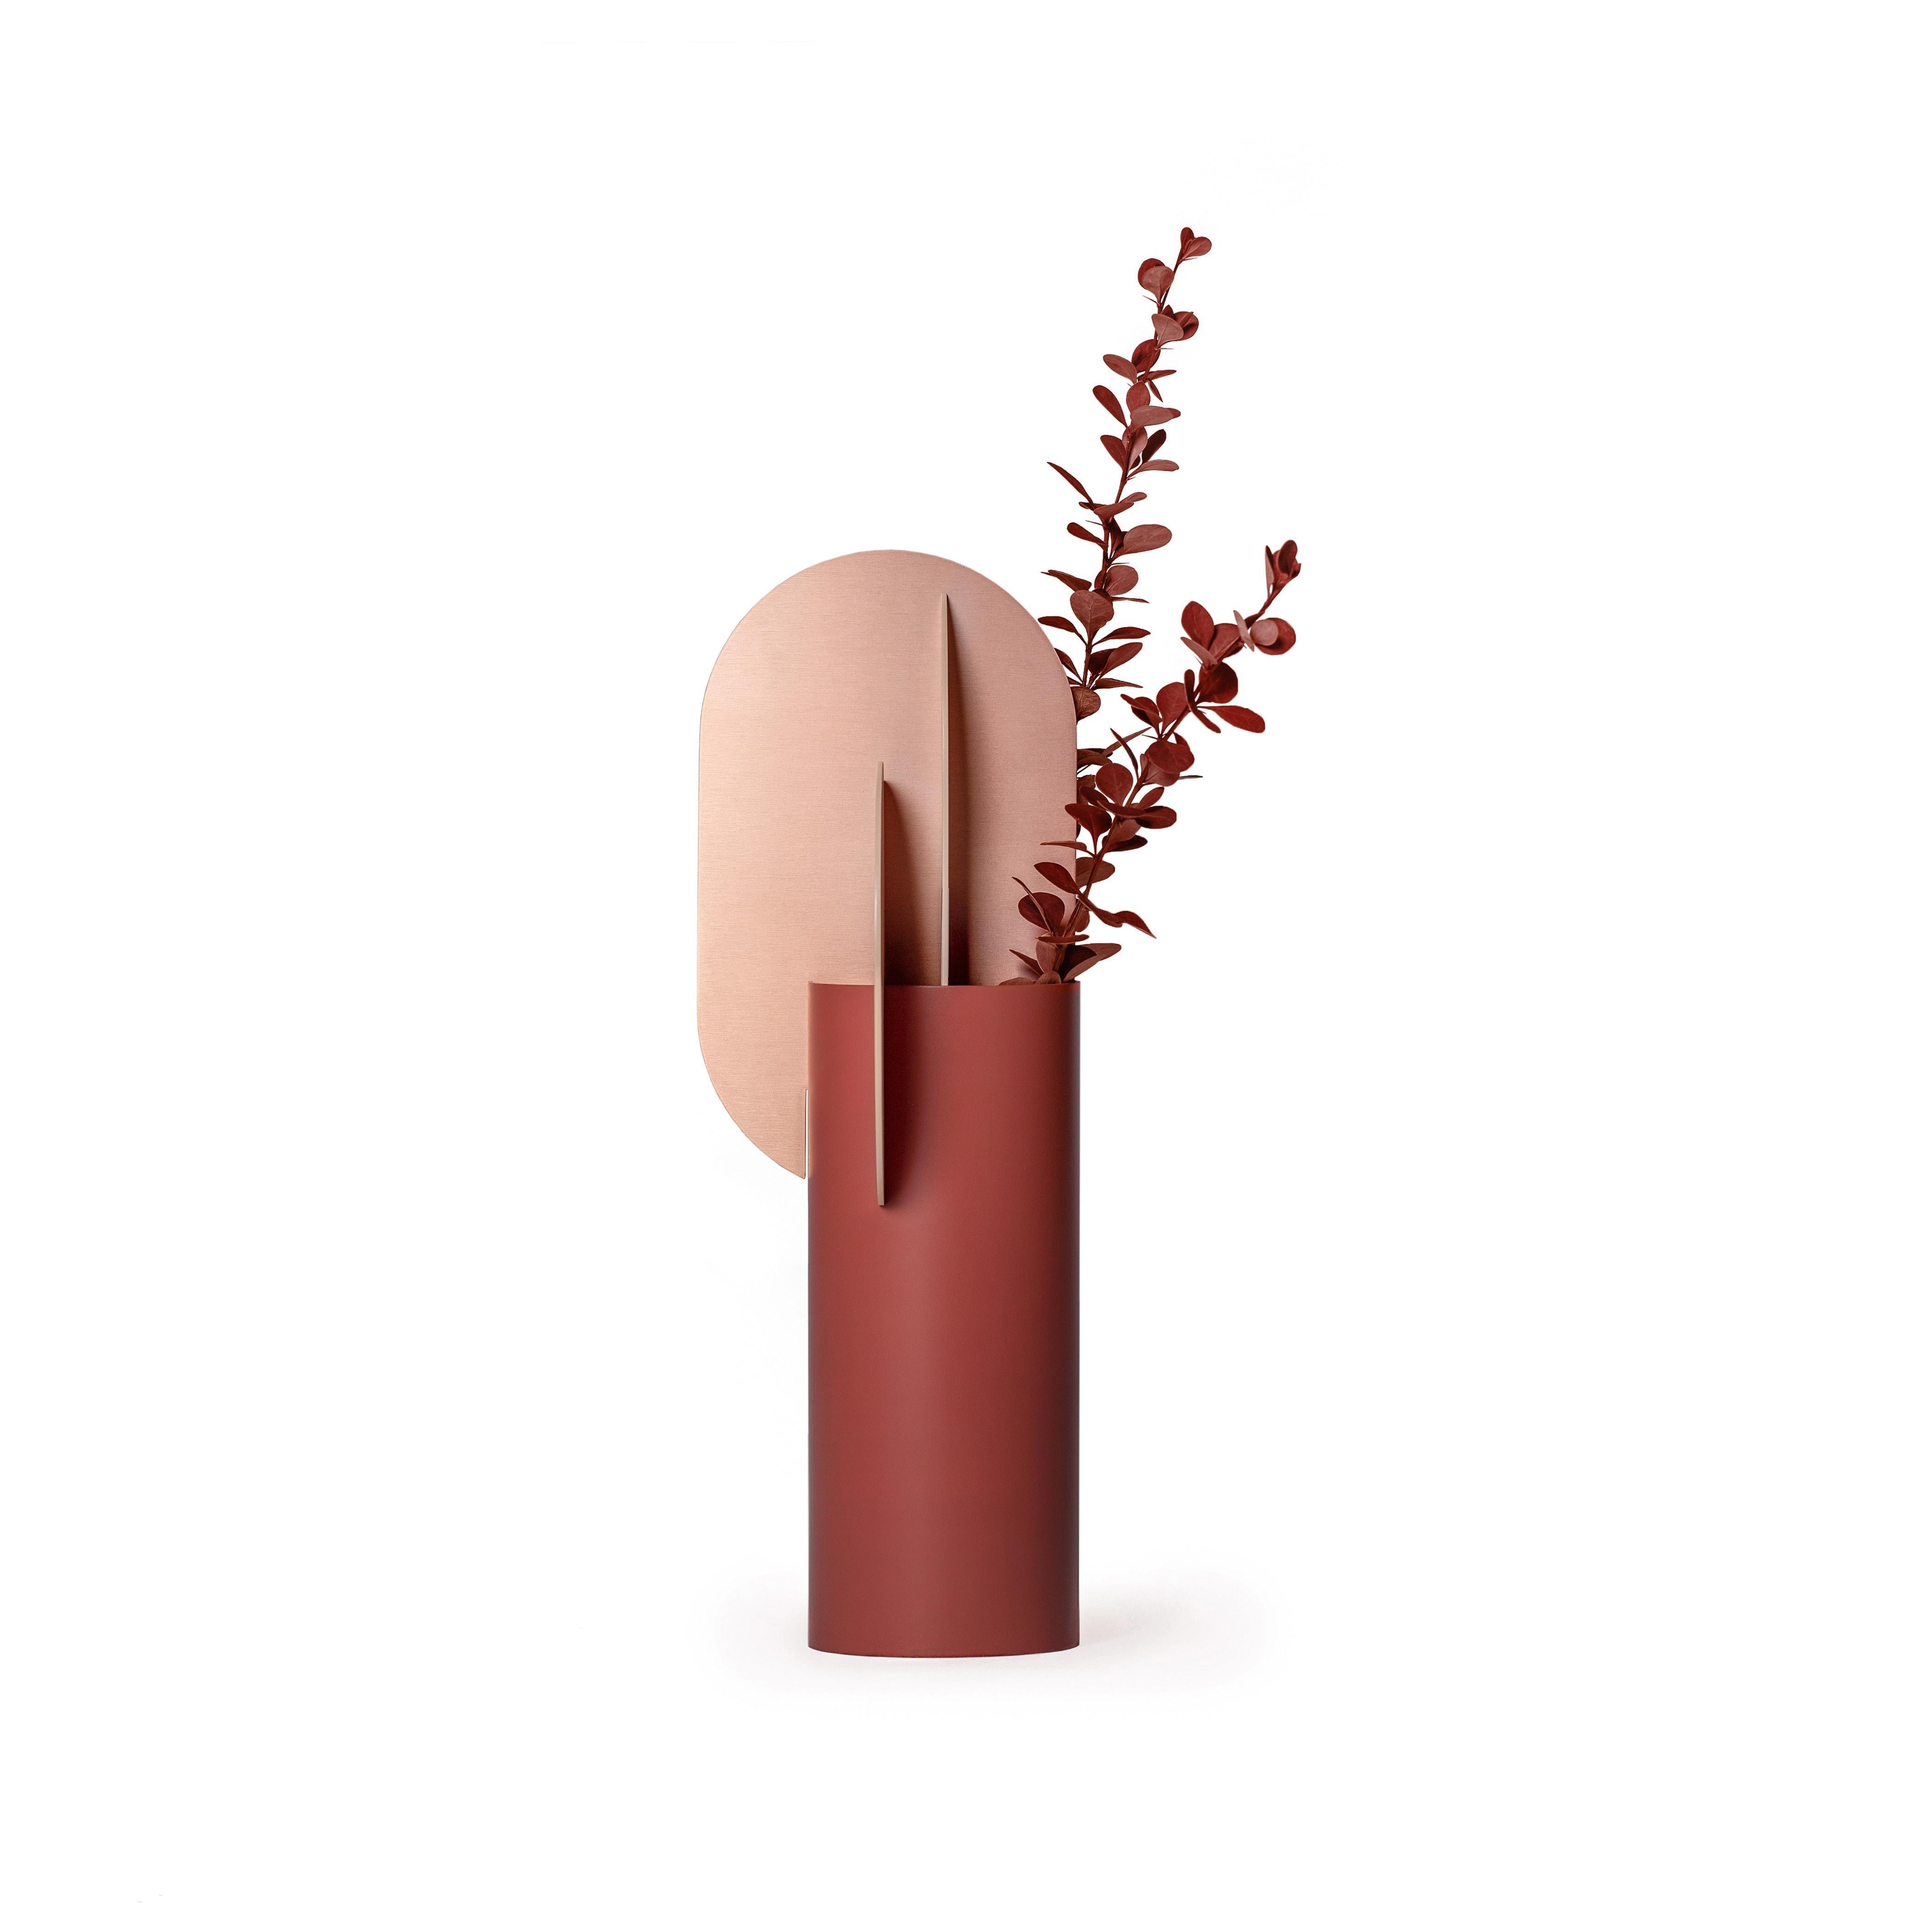 Contemporary Metal Vase 'Ekster CS7' by Noom, Copper and Steel In New Condition For Sale In Paris, FR